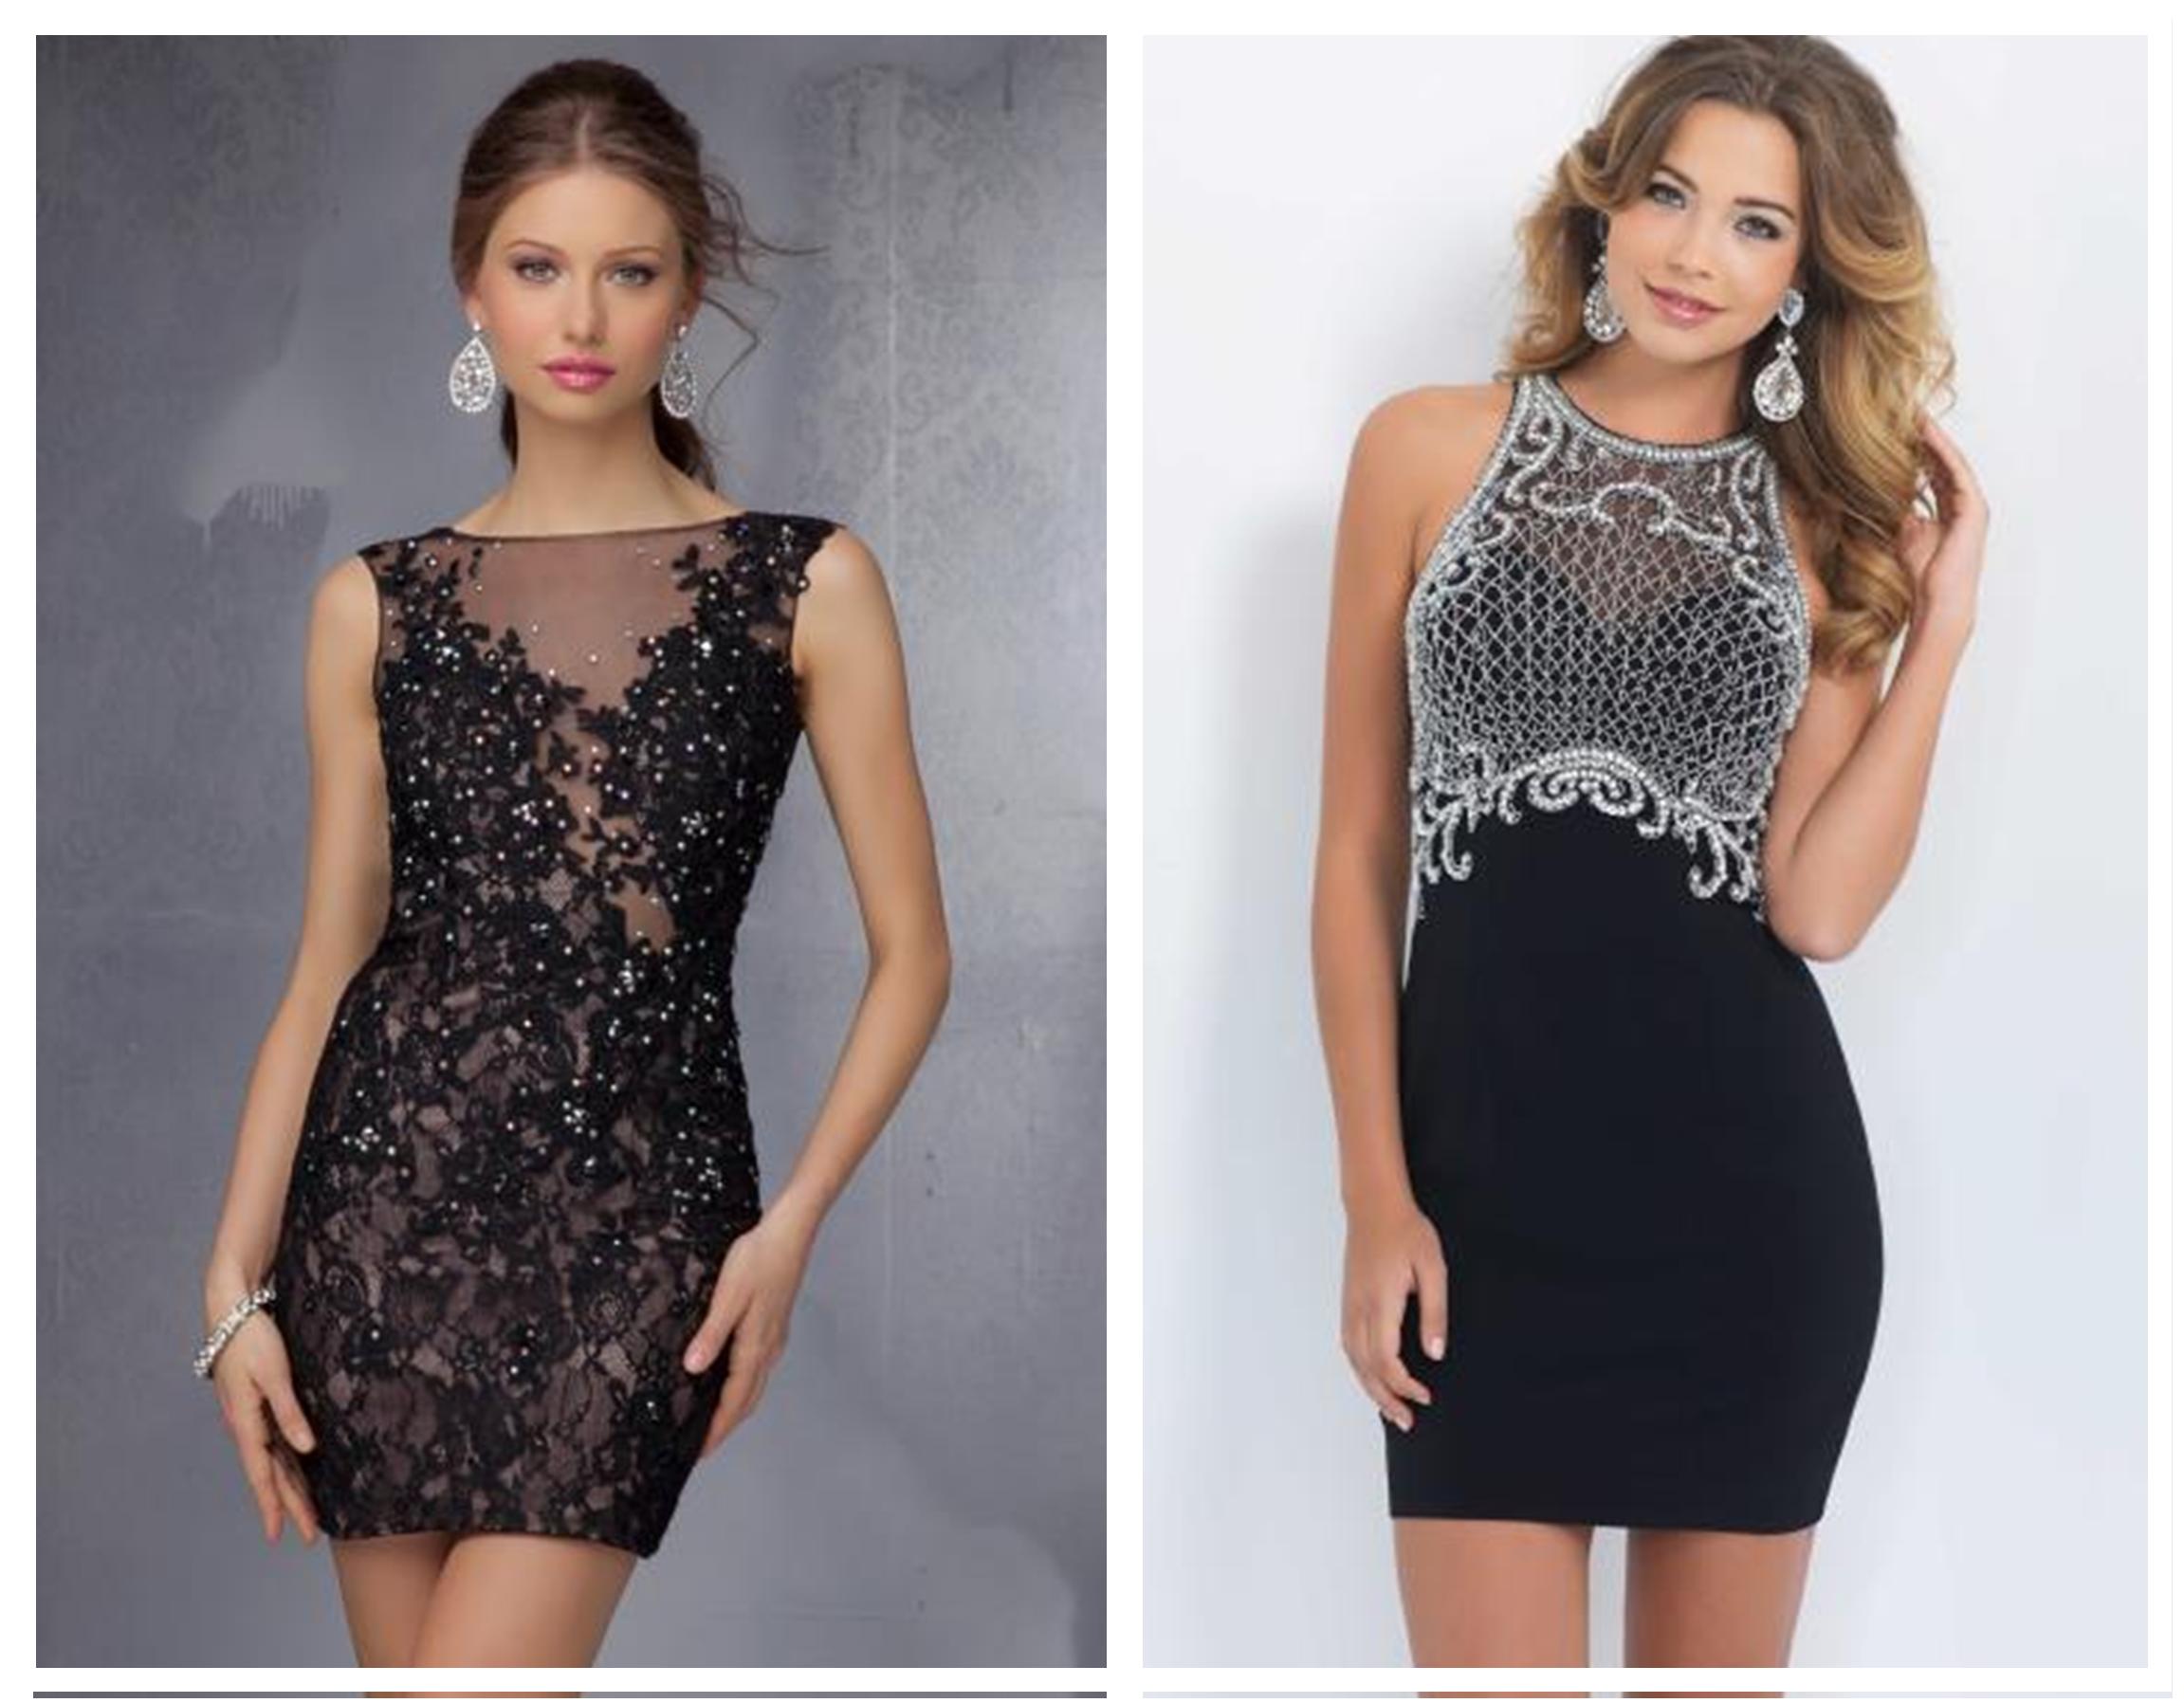 Choosing the right party dress for your body shape